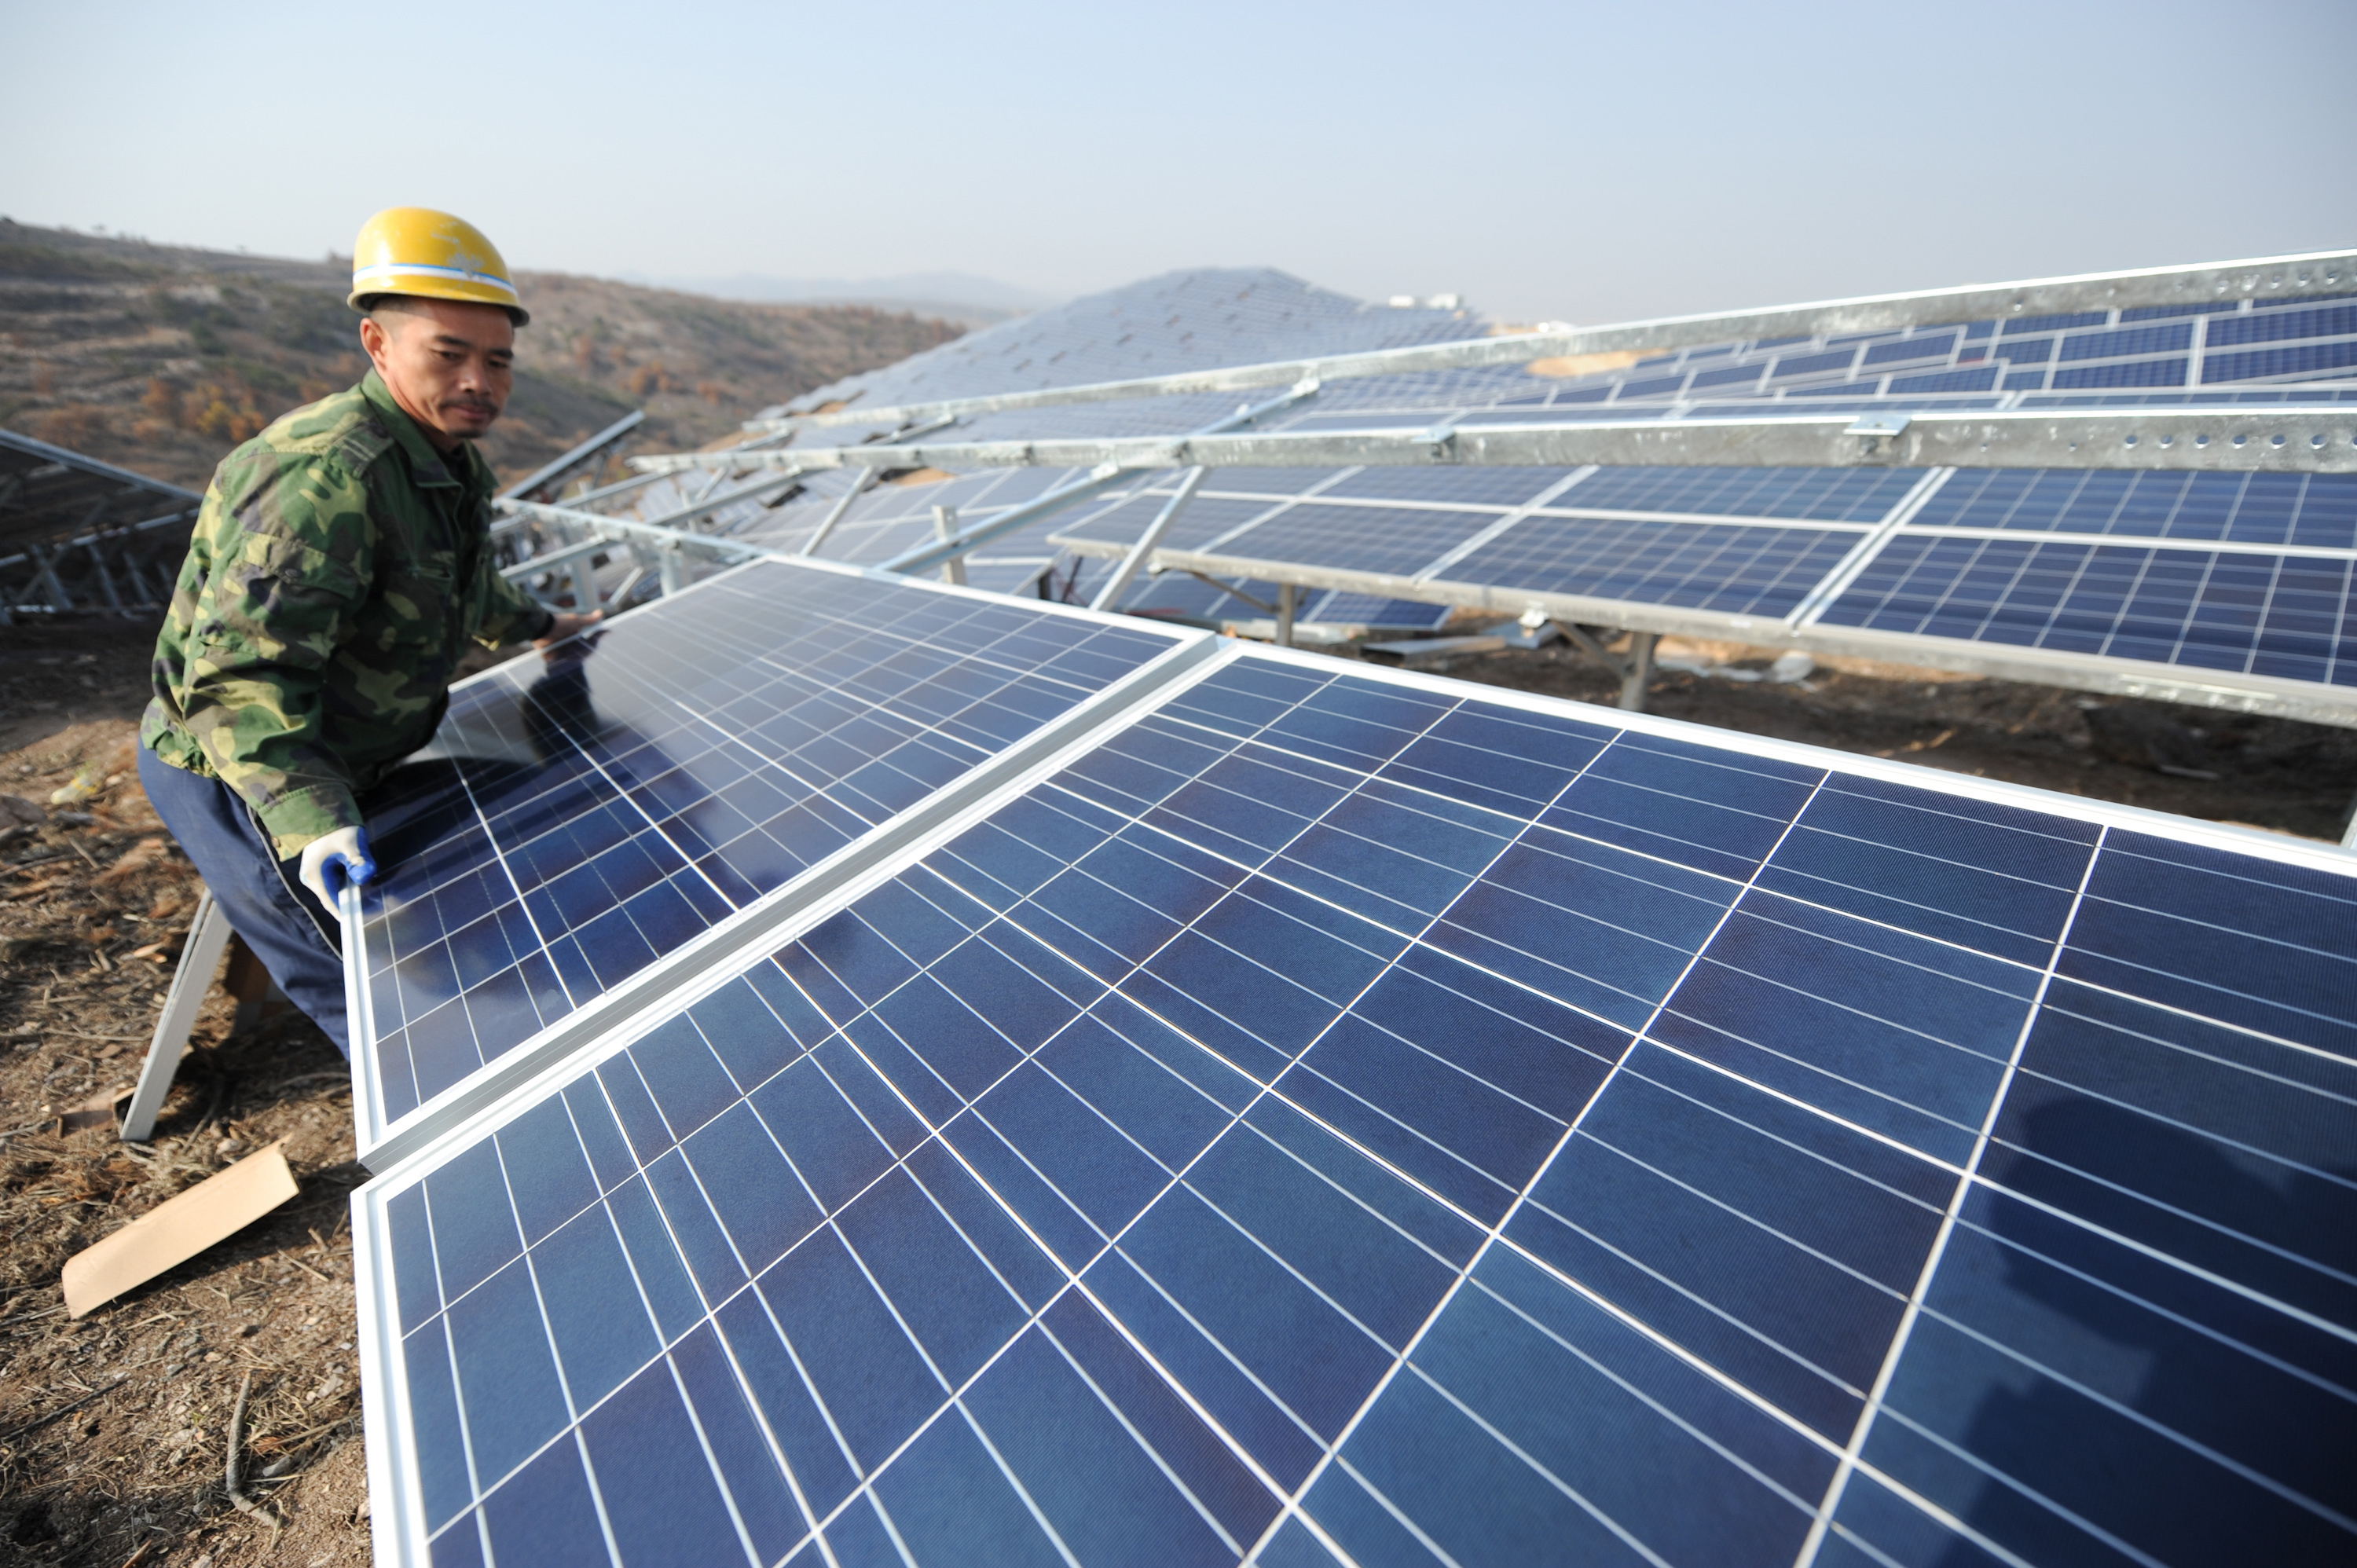 A worker installs polycrystalline silicon solar panels as terrestrial photovoltaic power project starts in 2015 in Yantai, Shandong Province of China. (VCG—Getty Images)